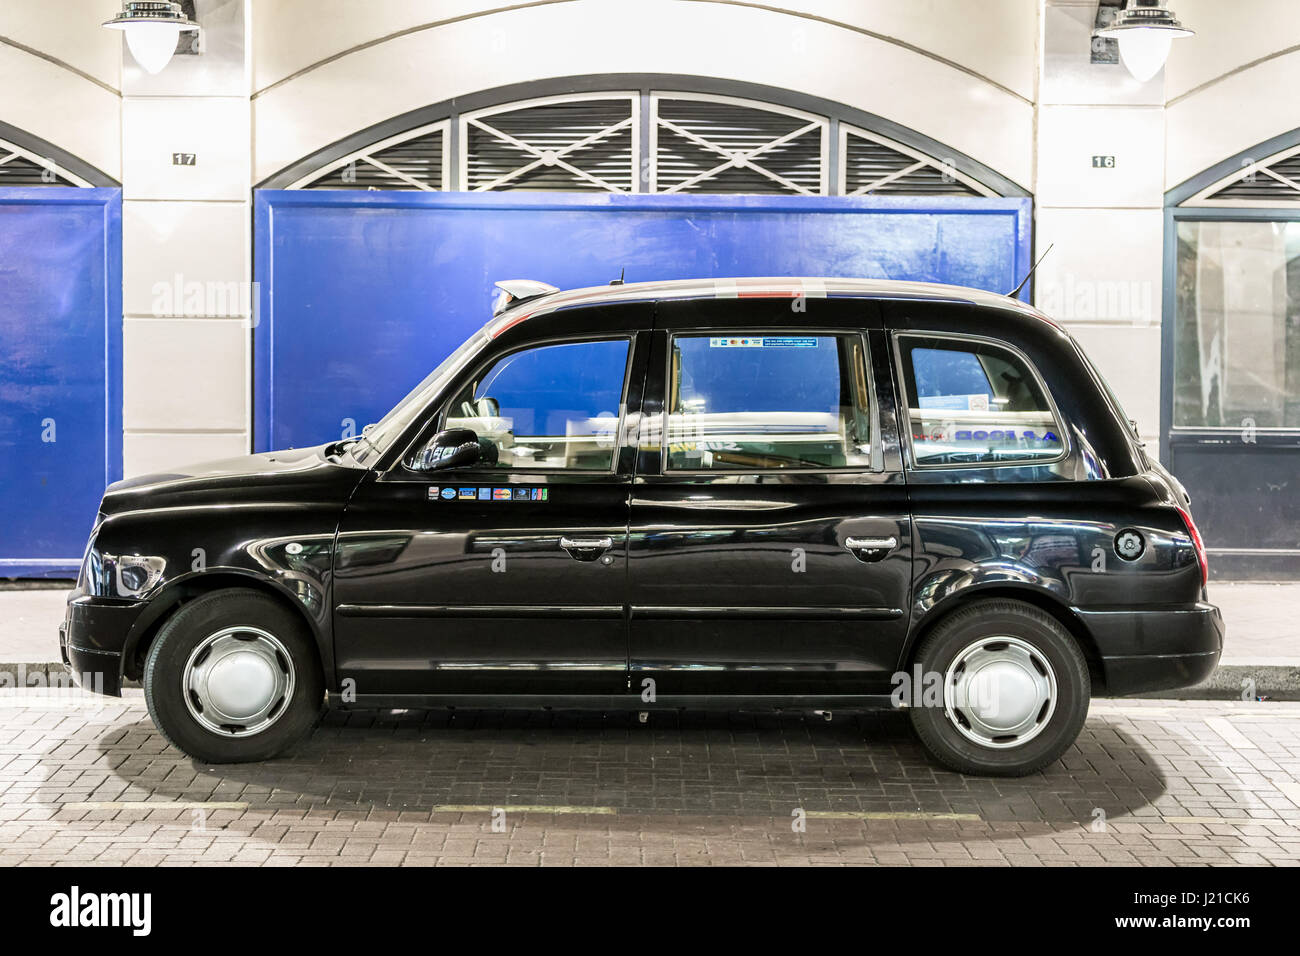 black taxi in london england Stock Photo